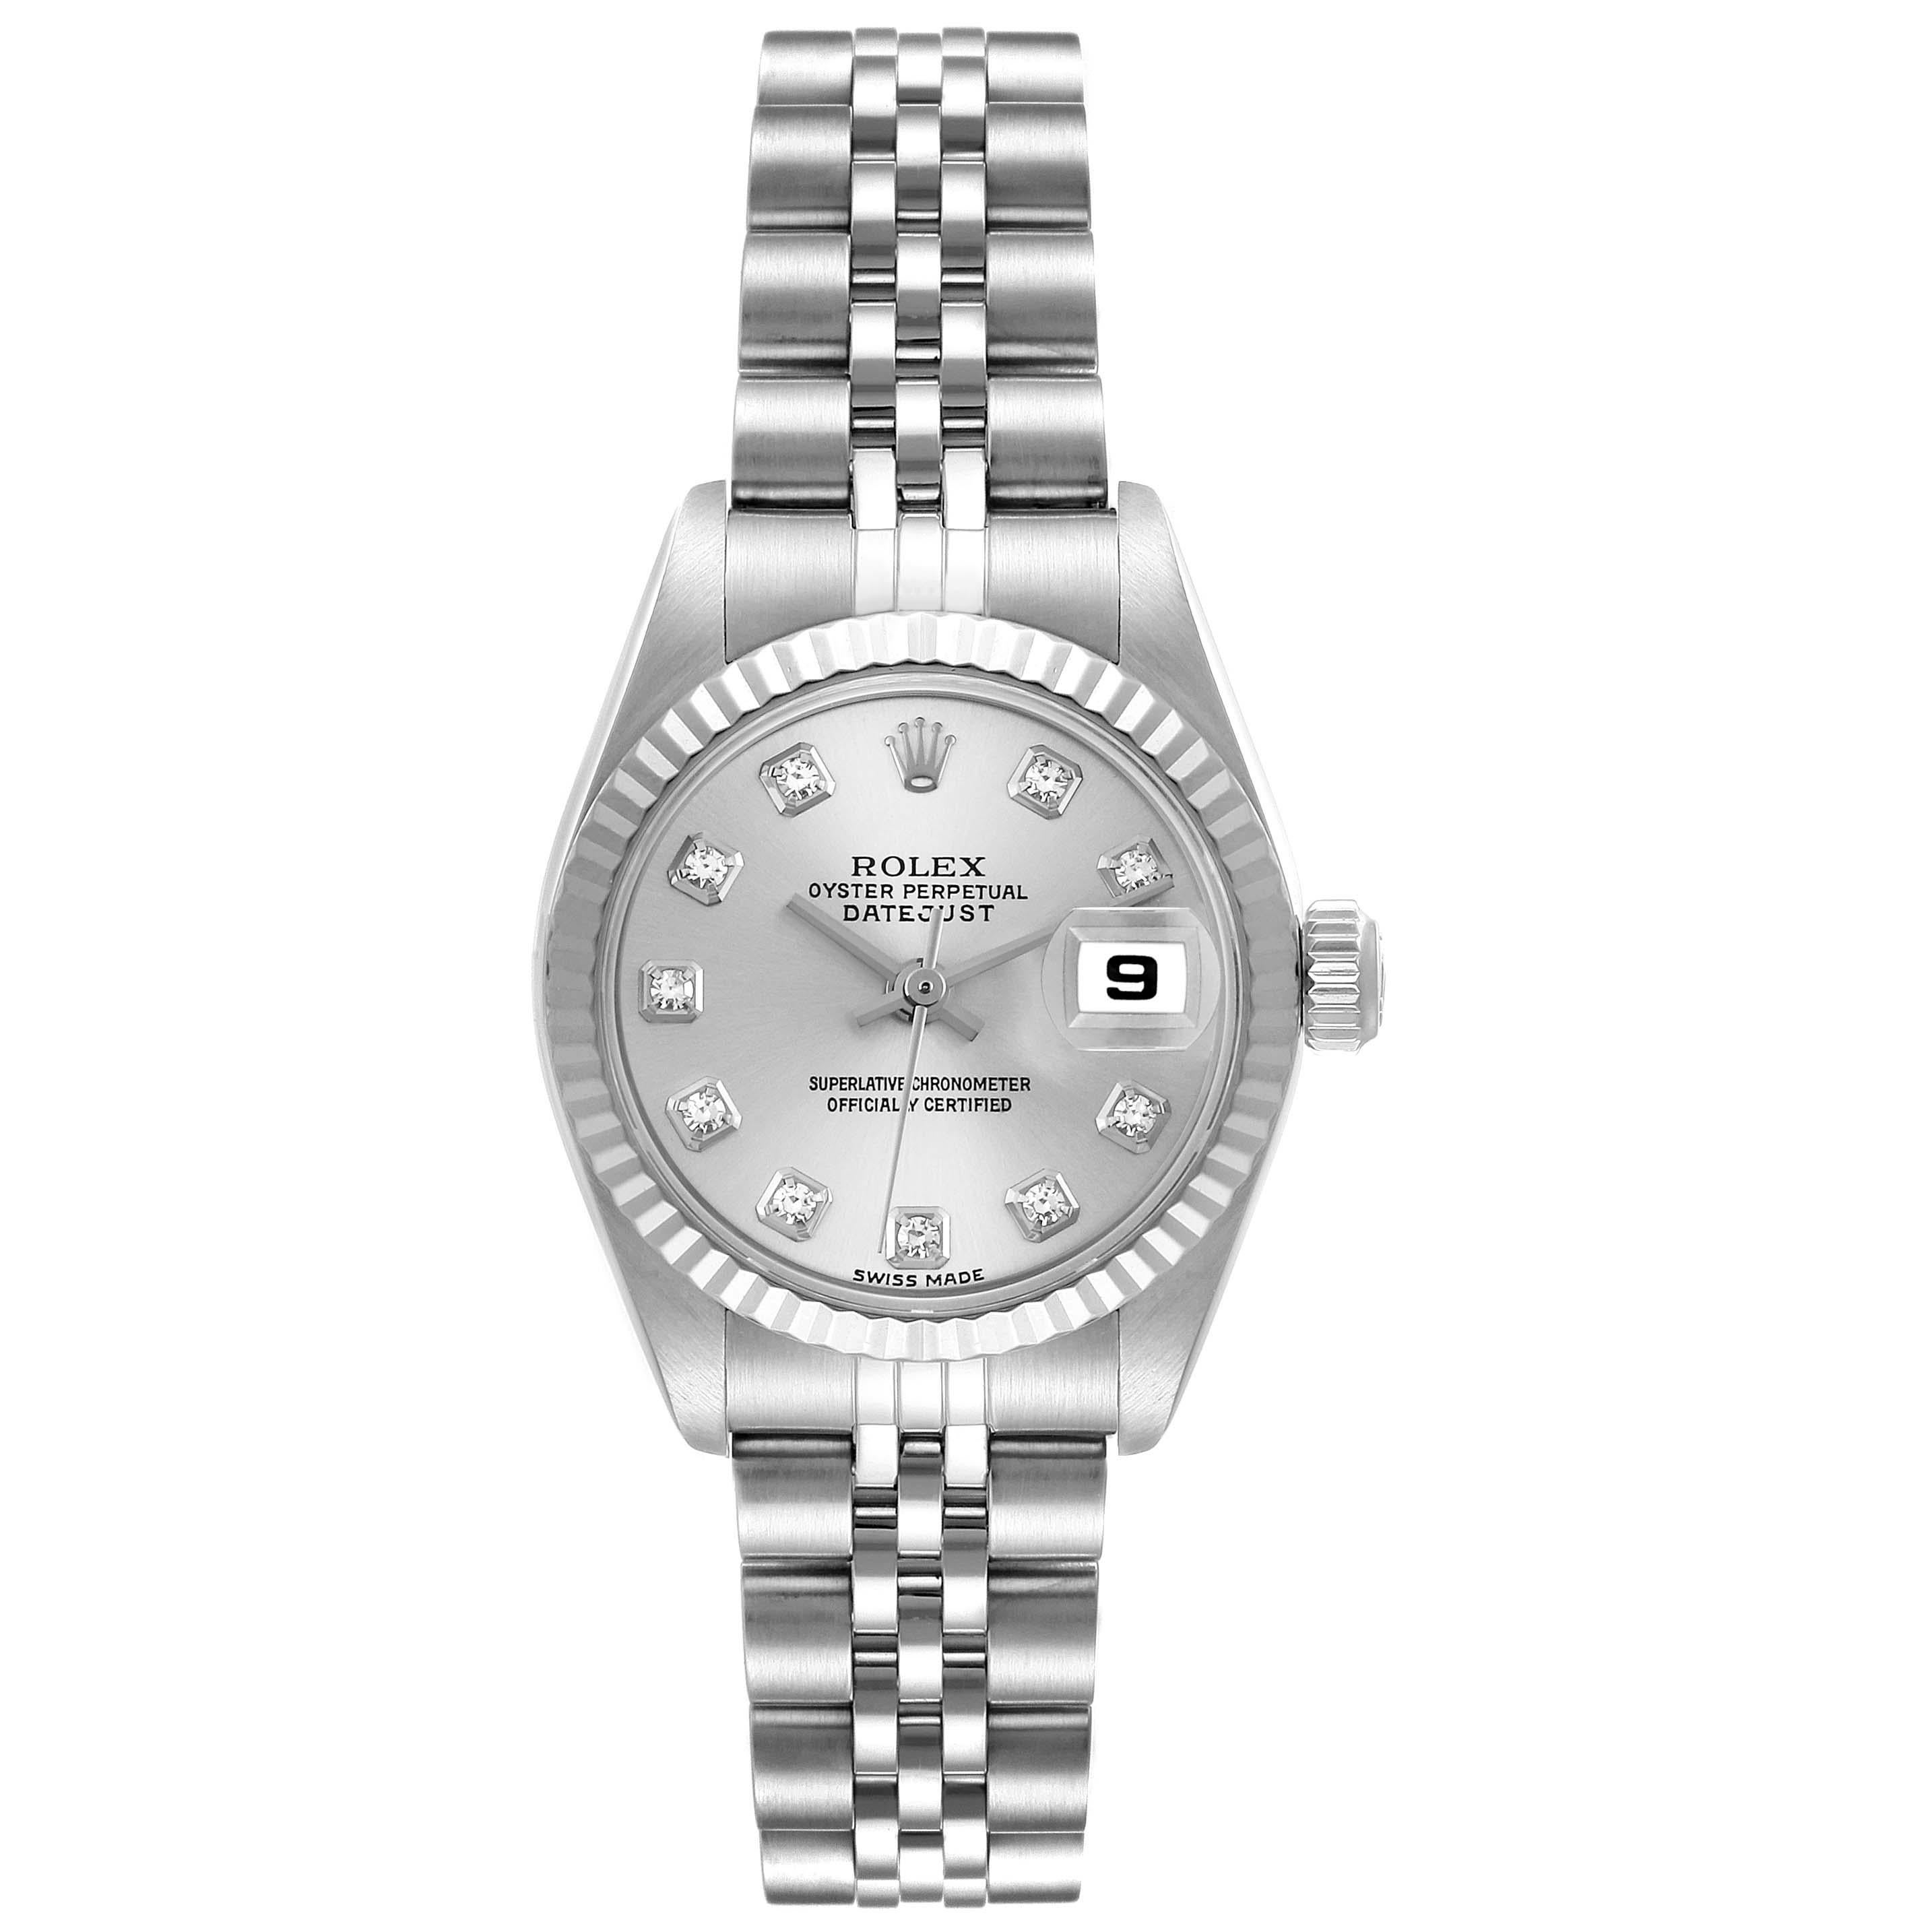 Rolex Datejust Steel White Gold Diamond Dial Ladies Watch 79174. Officially certified chronometer automatic self-winding movement. Stainless steel oyster case 26.0 mm in diameter. Rolex logo on a crown. 18K white gold fluted bezel. Scratch resistant